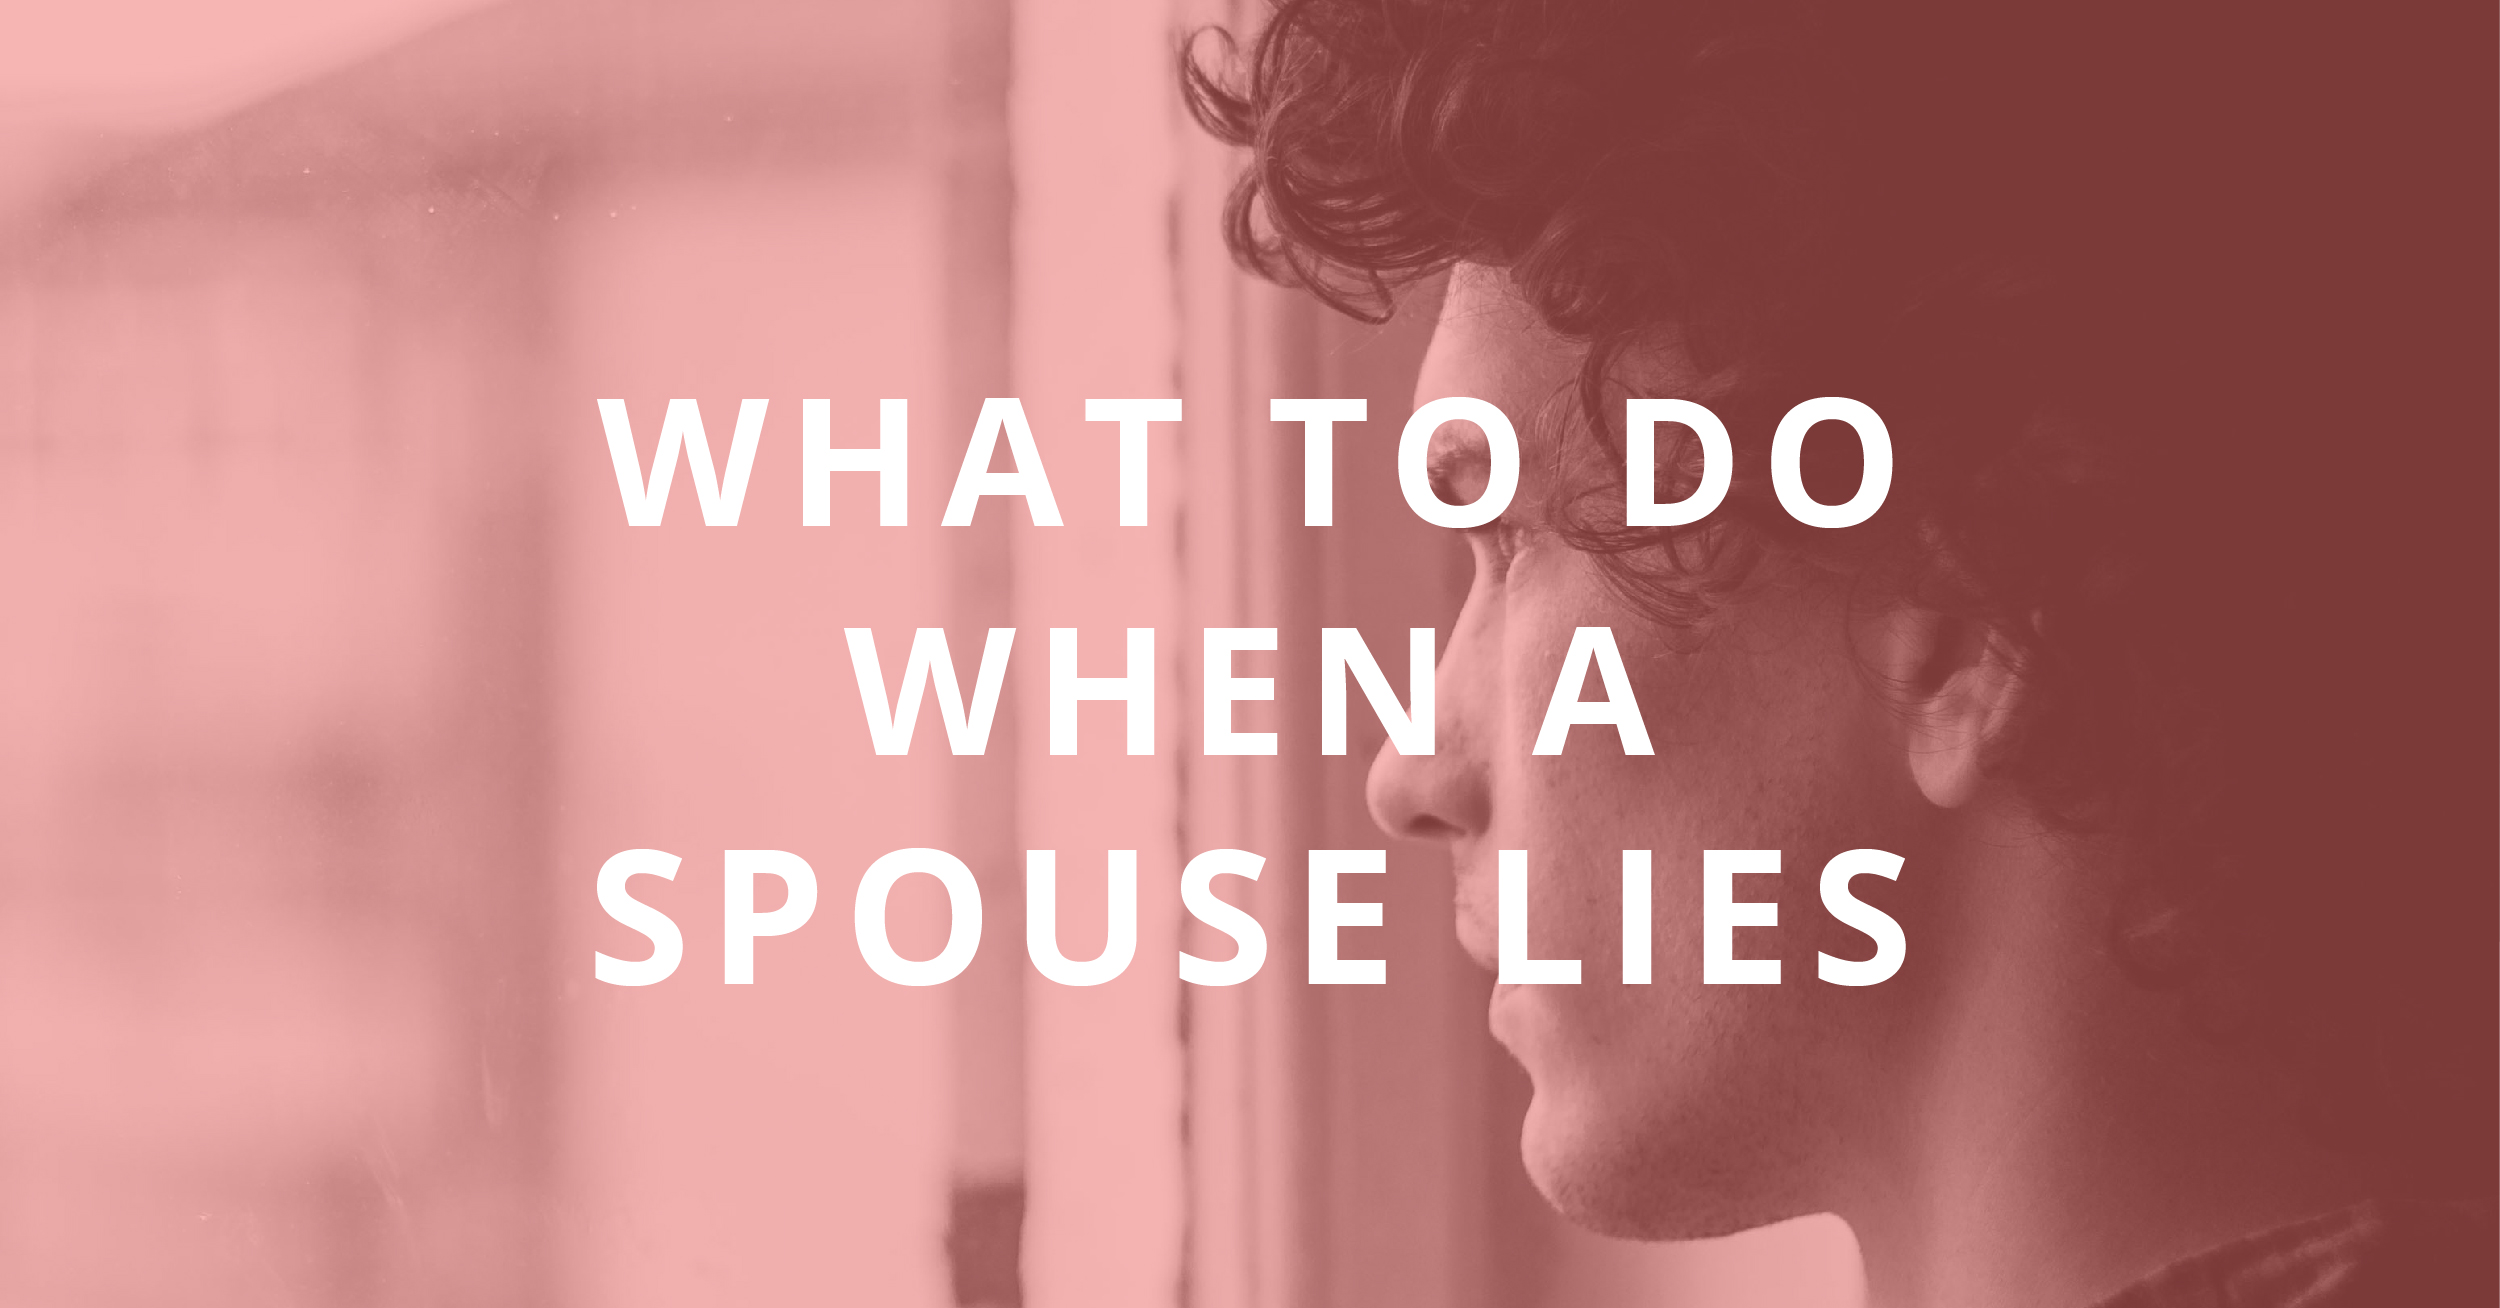 What to Do When a Spouse Lies